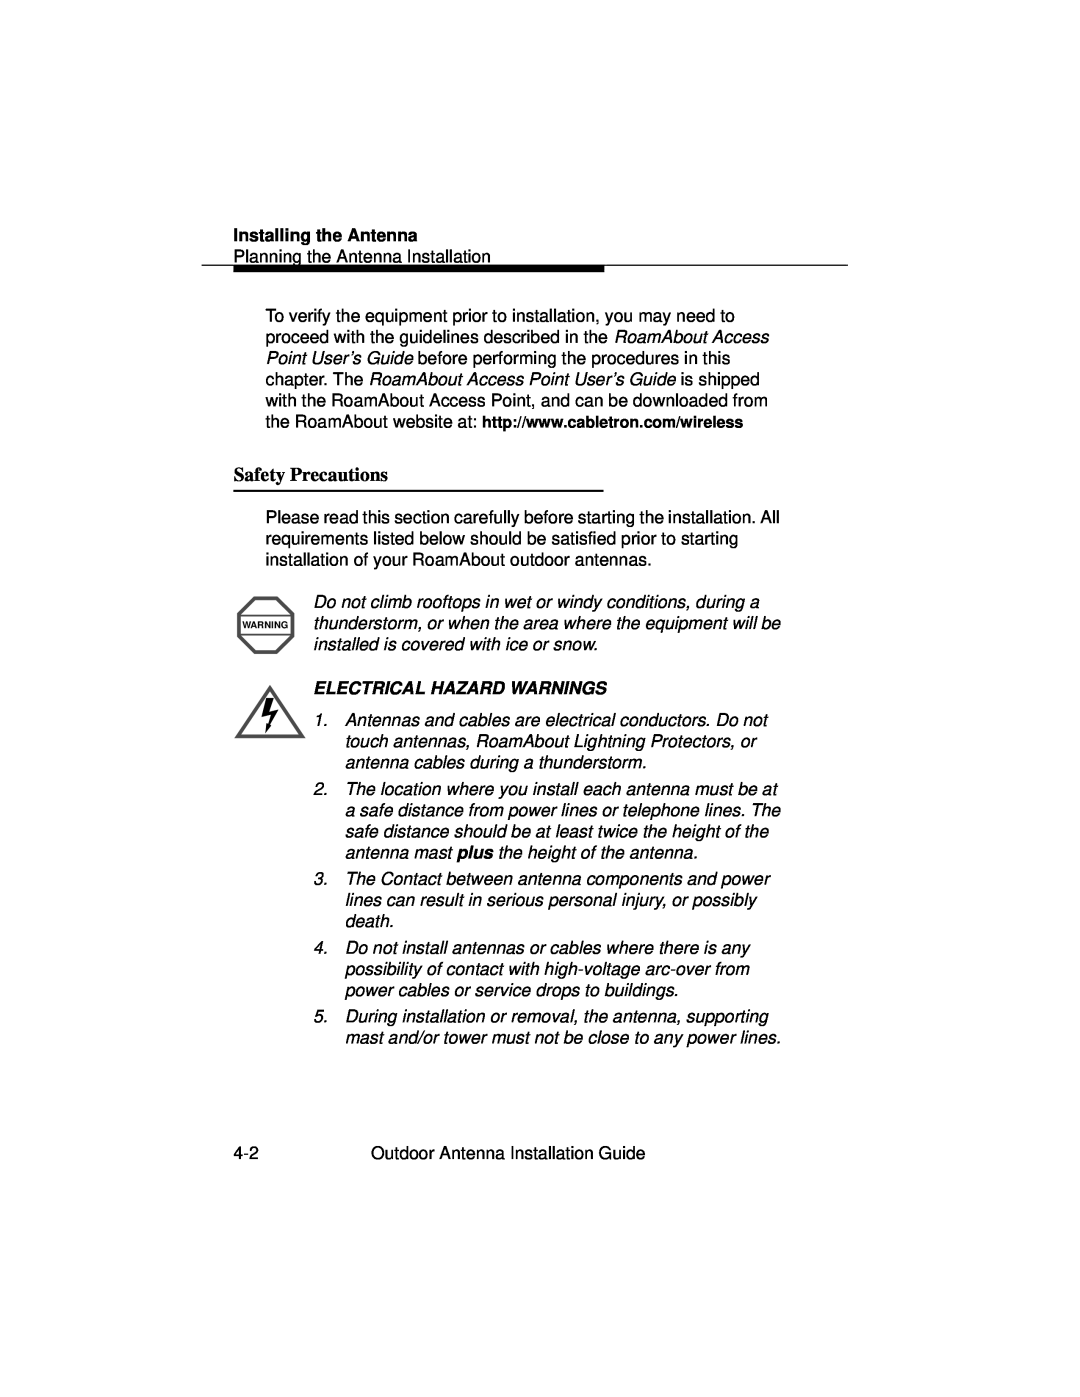 Cabletron Systems 9033073 manual Safety Precautions, Installing the Antenna, Electrical Hazard Warnings 